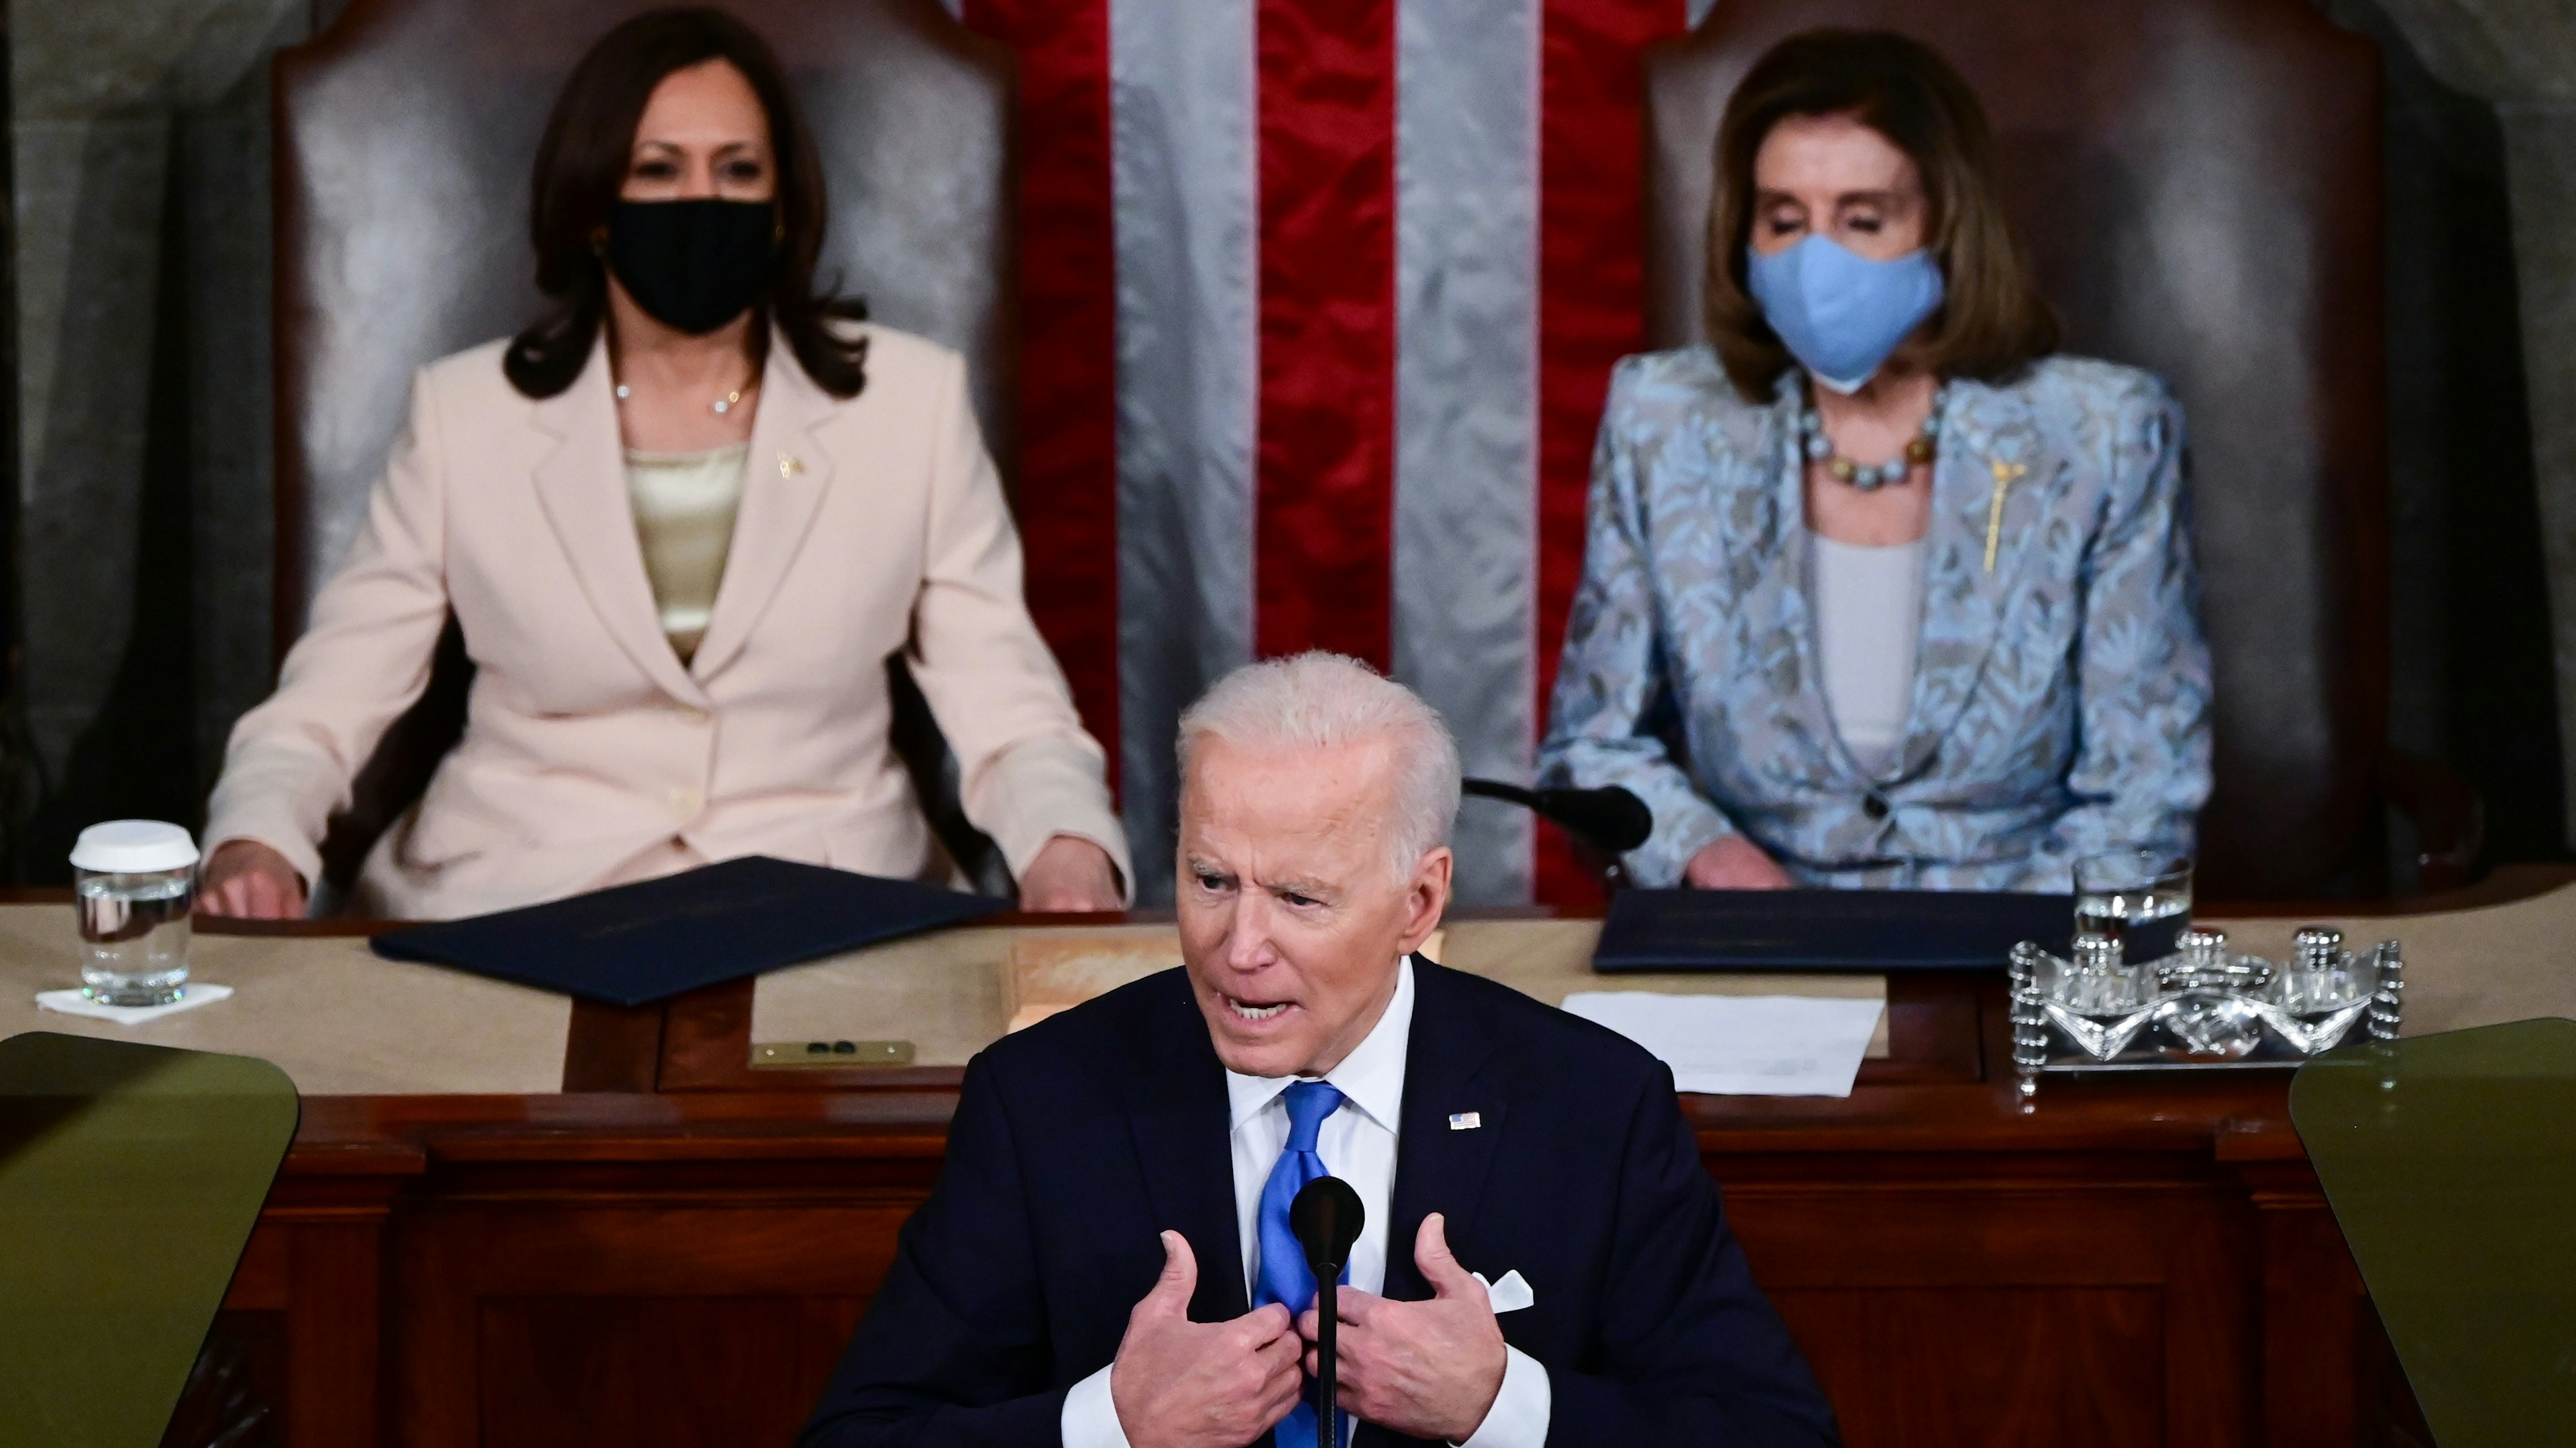 President Joe Biden addresses a joint session of congress as Vice President Kamala Harris (L) and Speaker of the House U.S. Rep. Nancy Pelosi (D-CA) (R) look on in the House chamber of the U.S. Capitol on April 28, 2021 in Washington, DC.